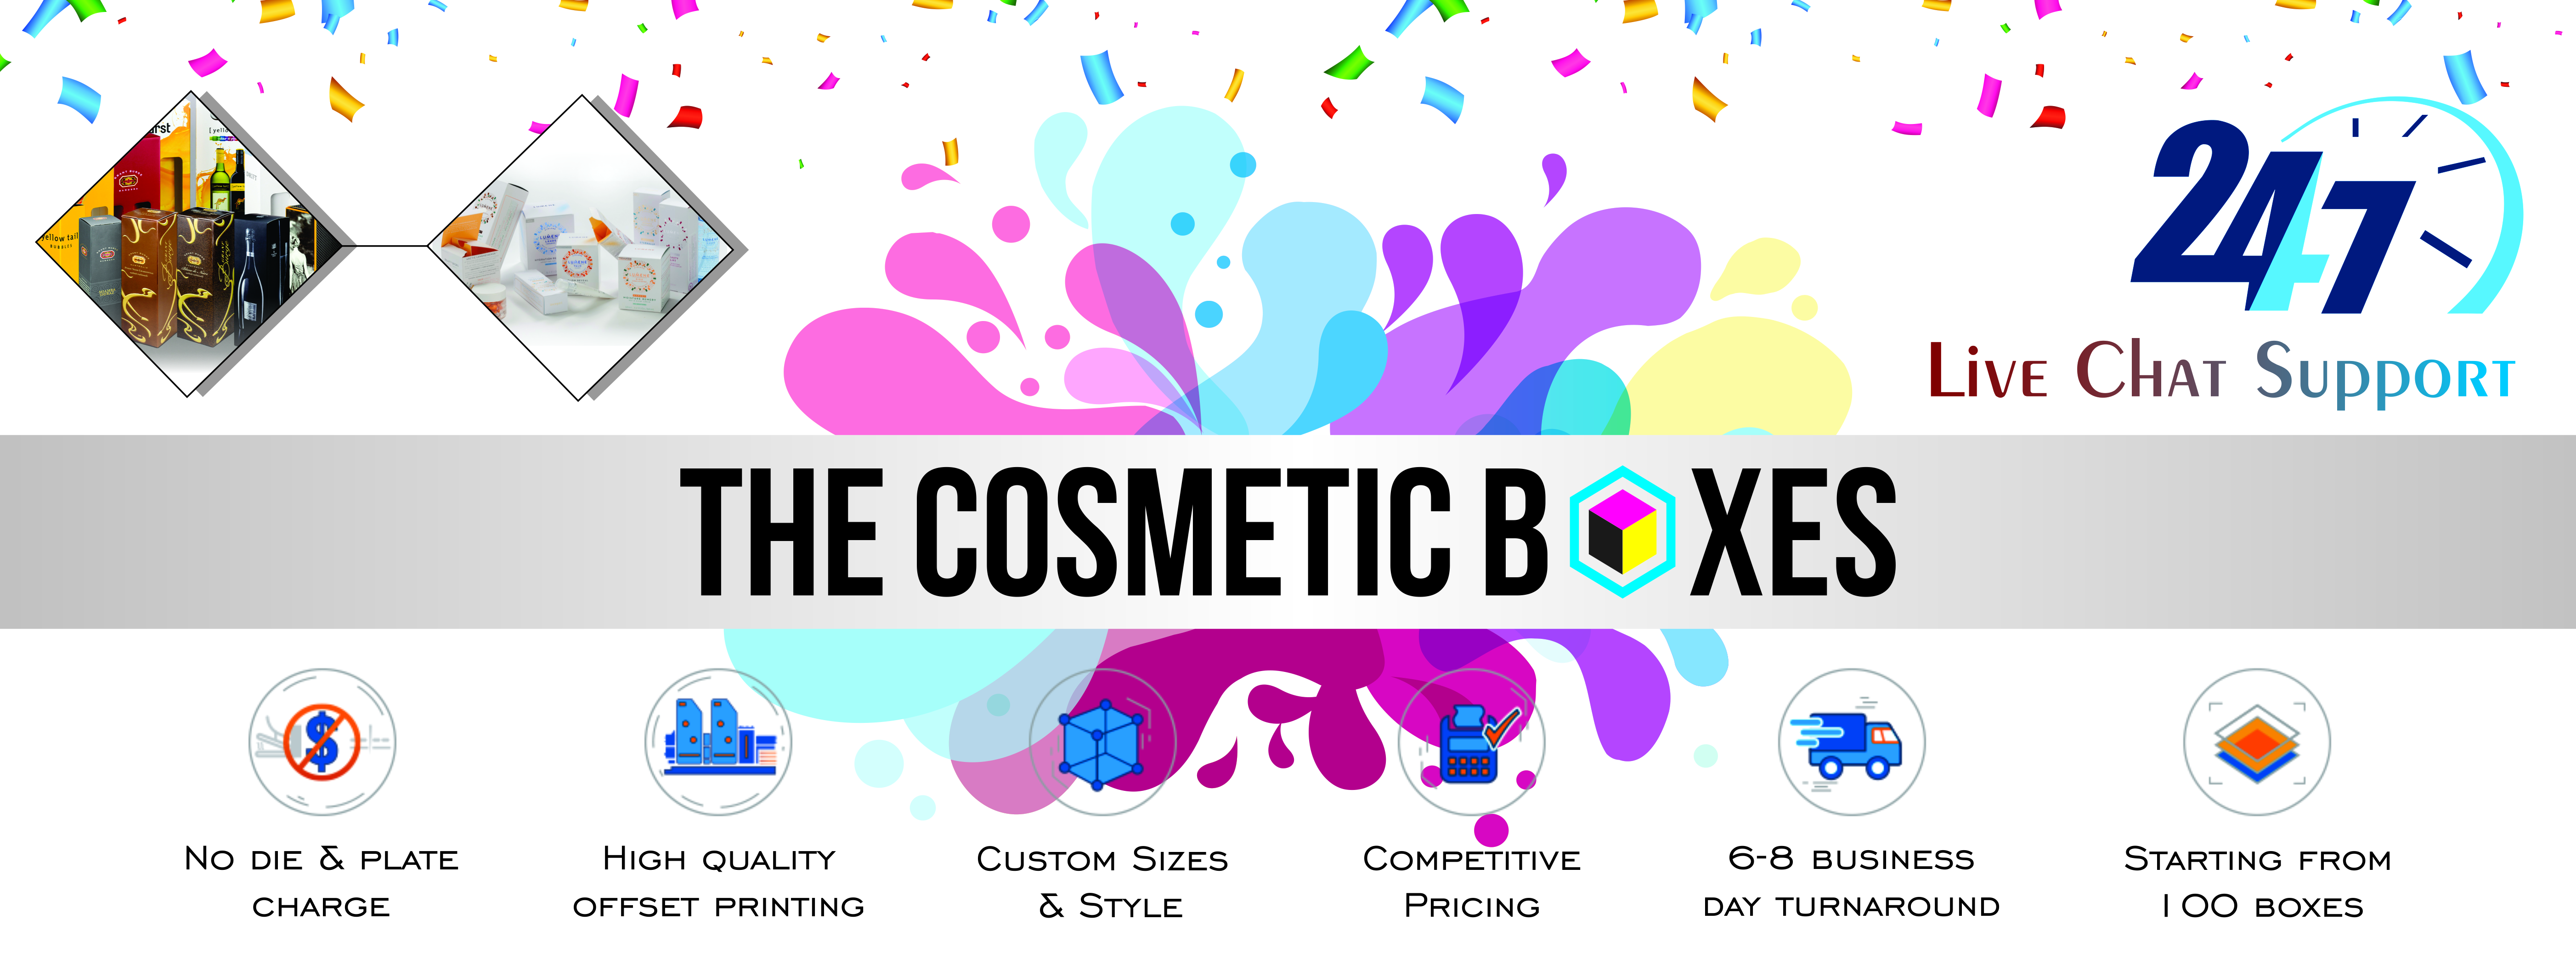 Thecosmeticboxes'